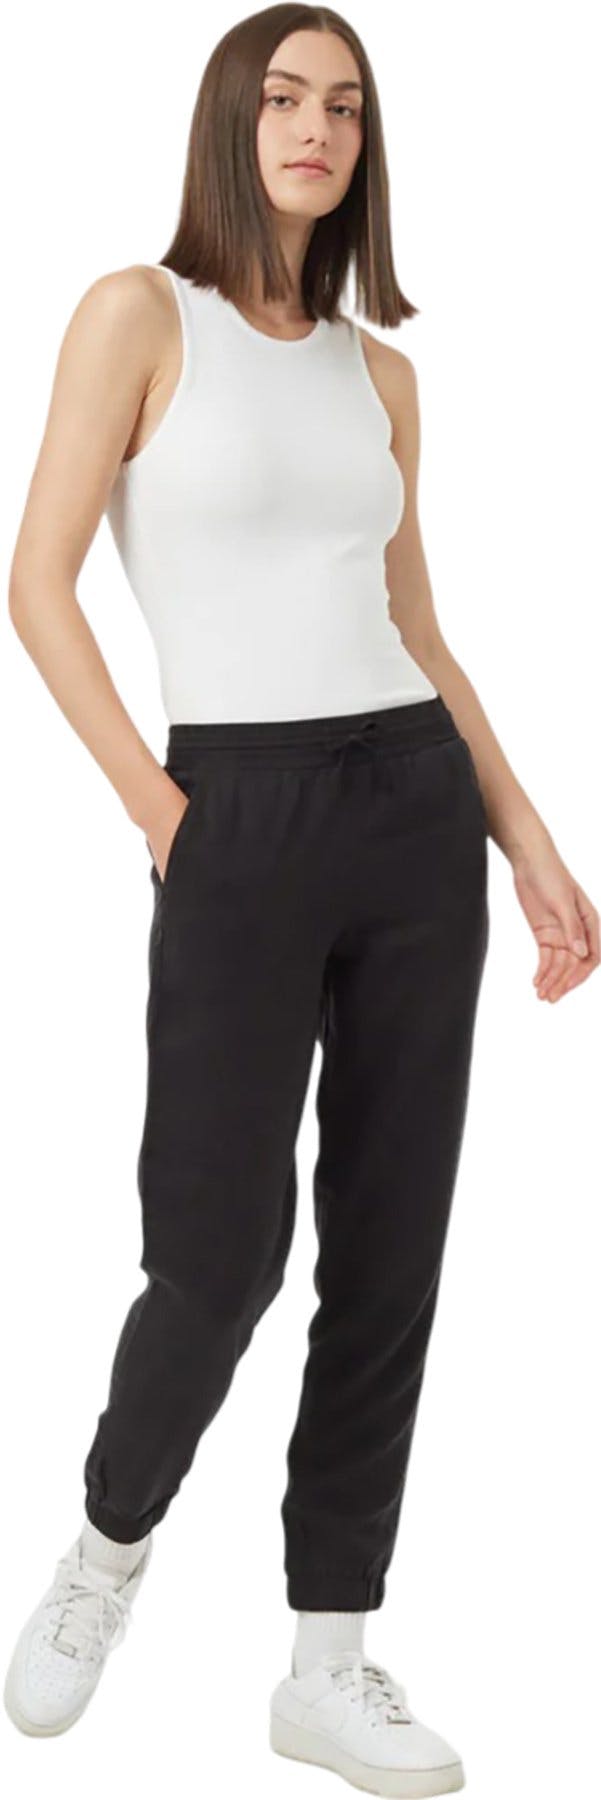 Product image for Tencel Jogger - Women's